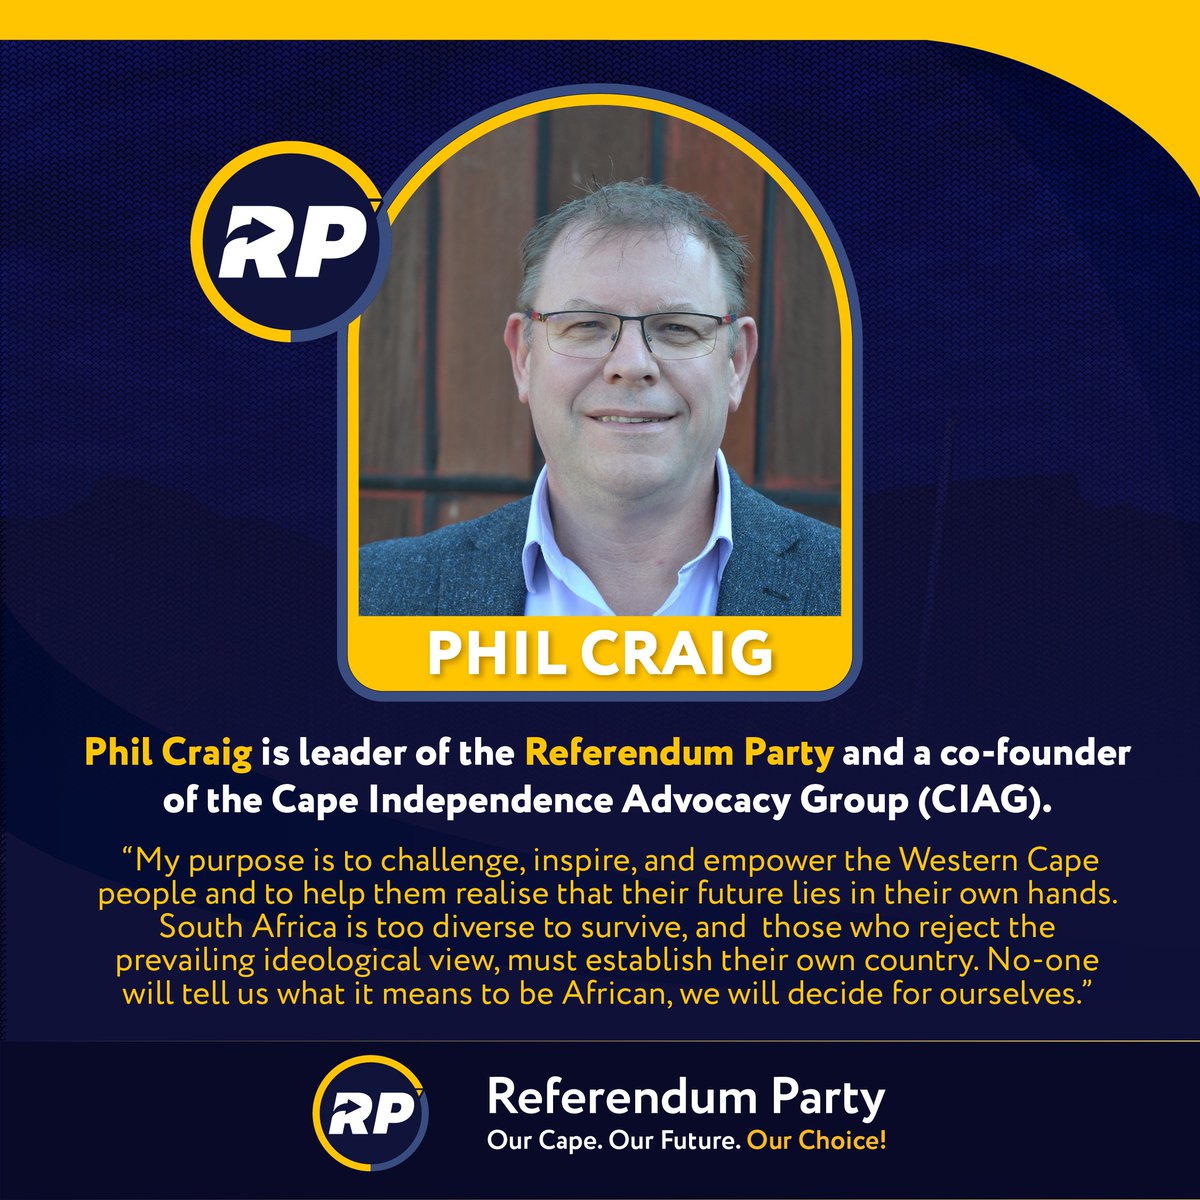 RP leader Phil Craig will be discussing Cape Independence on CapeTalk at 11:05 today and again during a multi-party debate on Eden FM this evening at 18:00. Be sure to tune in for the facts about Cape Independence. #CapeIndependence #ReferendumParty